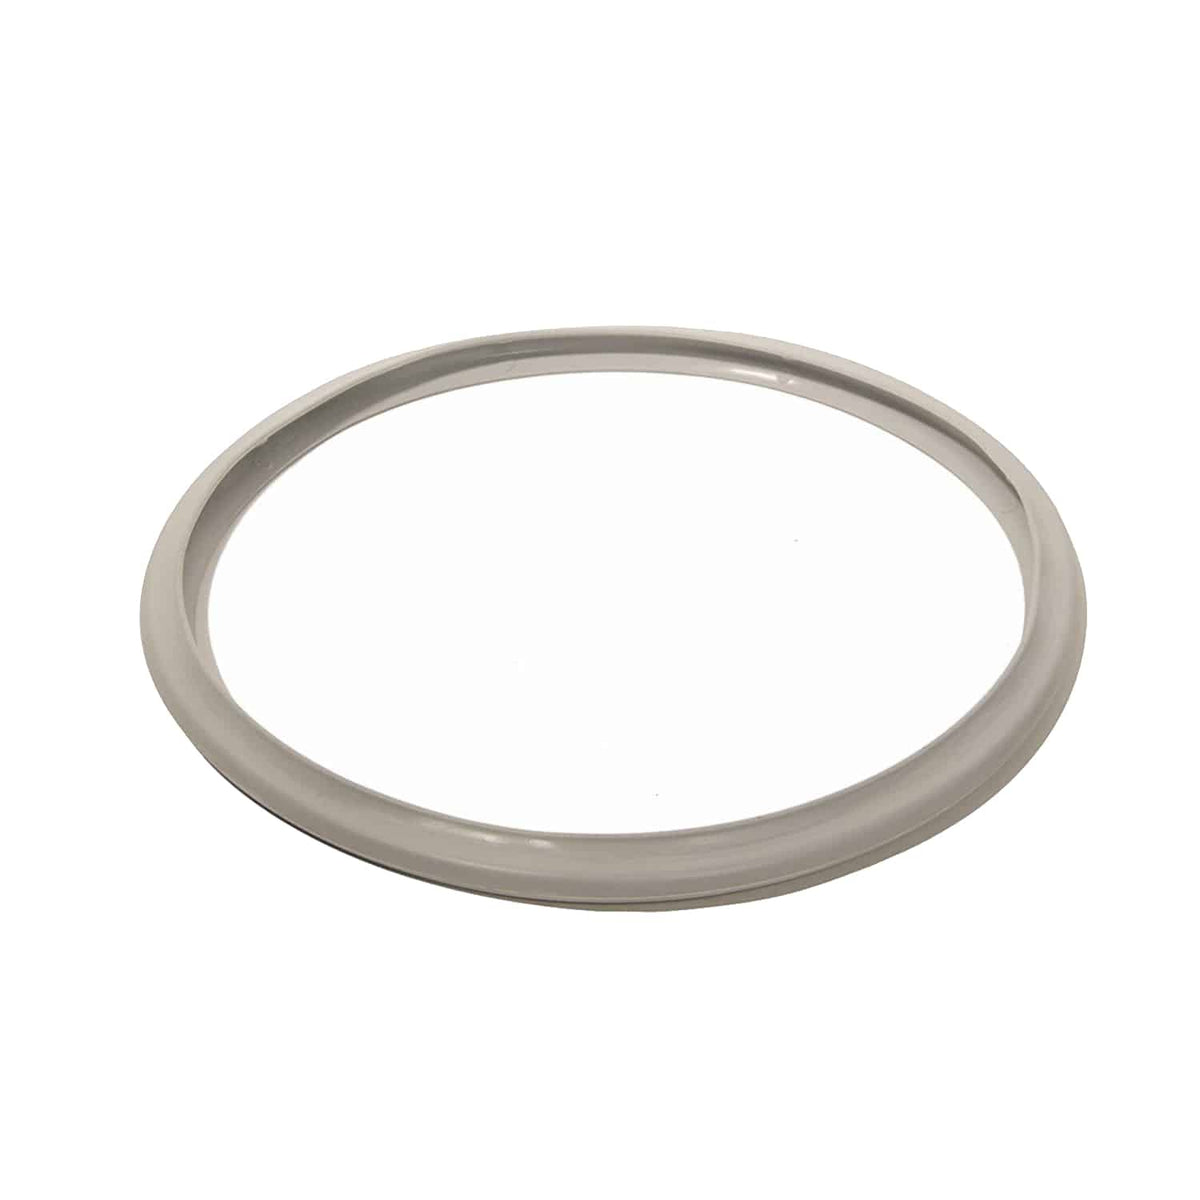  Pressure Cooker Sealing Ring - Silicone (Pack of 2